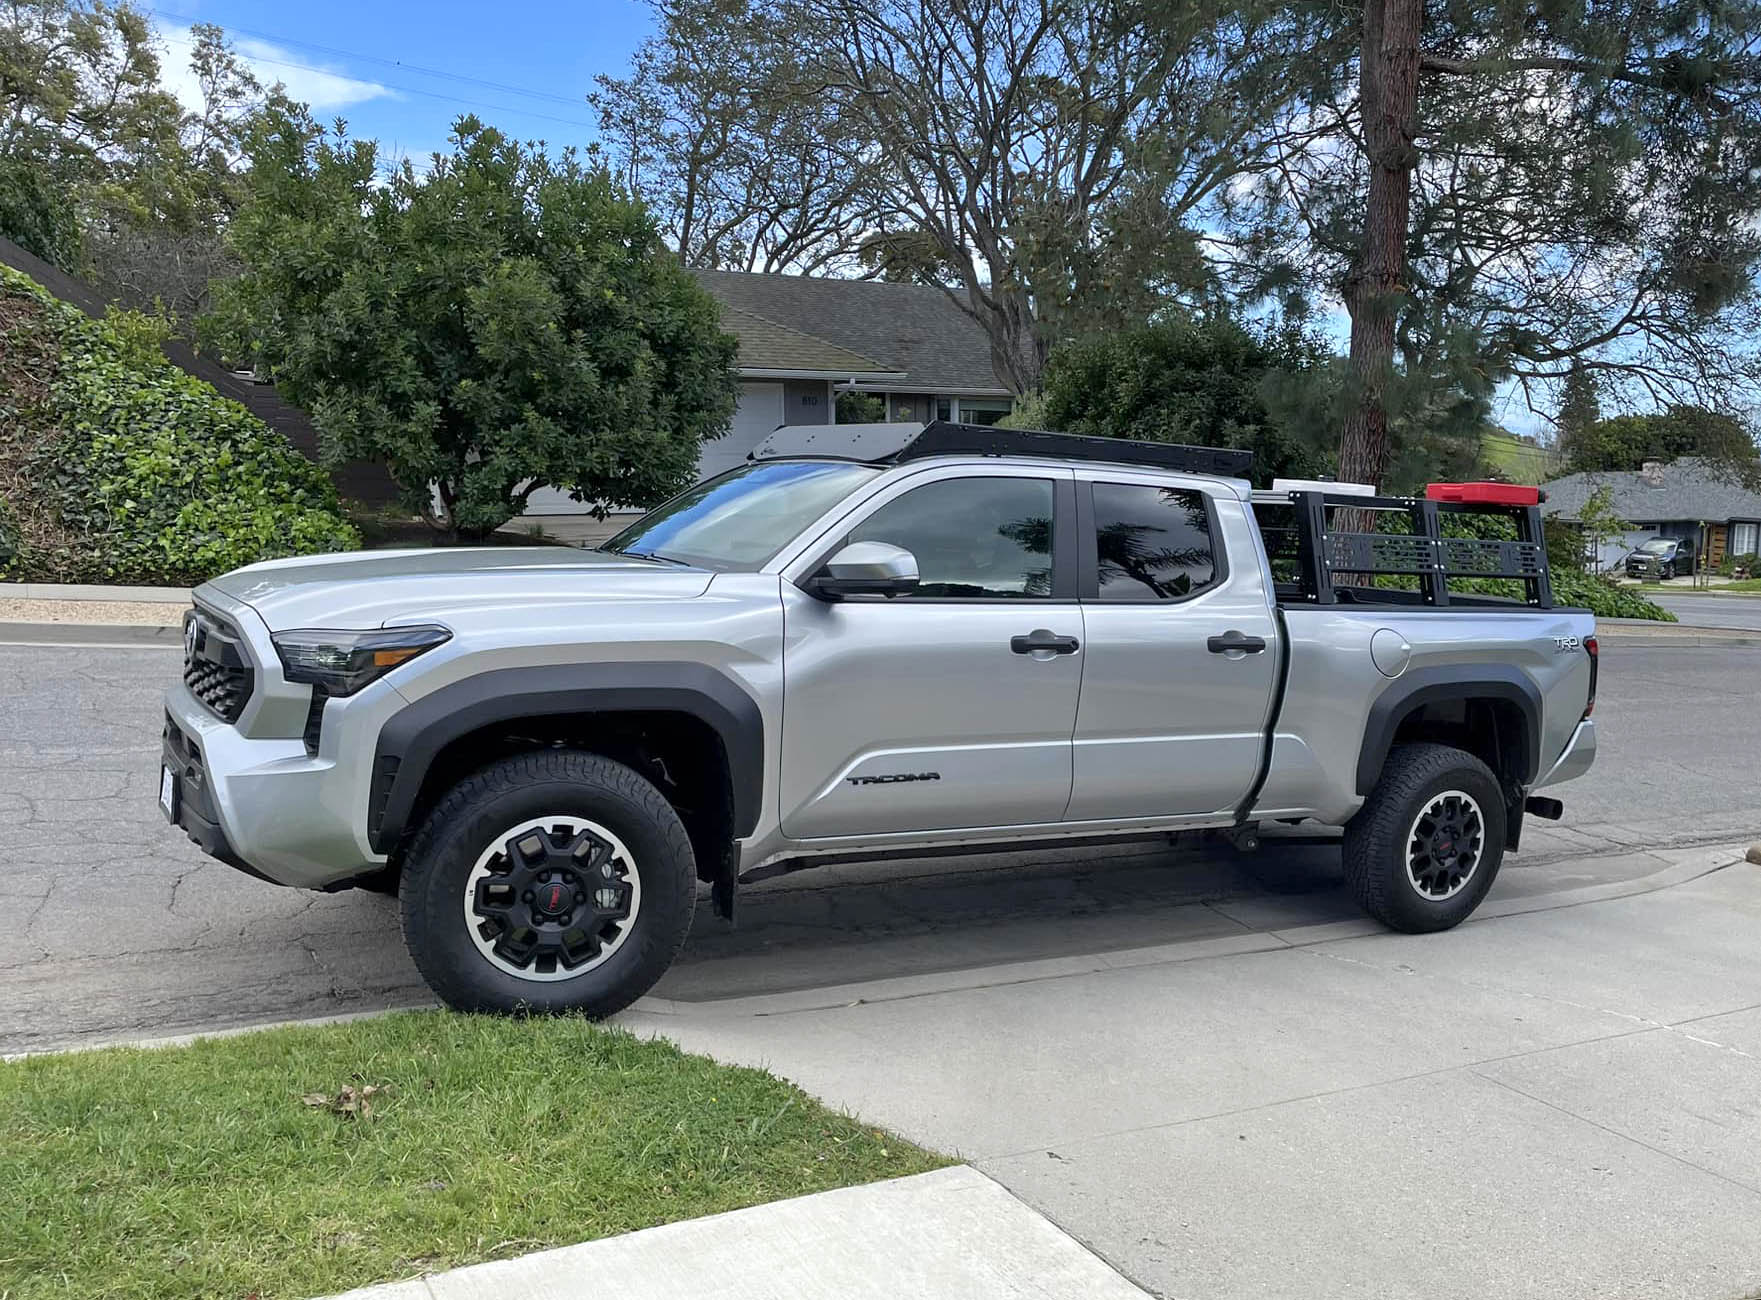 2024 Tacoma Official CELESTIAL SILVER METALLIC 2024 Tacoma Thread (4th Gen) 2024 Tacoma TRD OffRoad Long Bed Build w: Cali Raised LED full height bed rack + Prinsu roof r